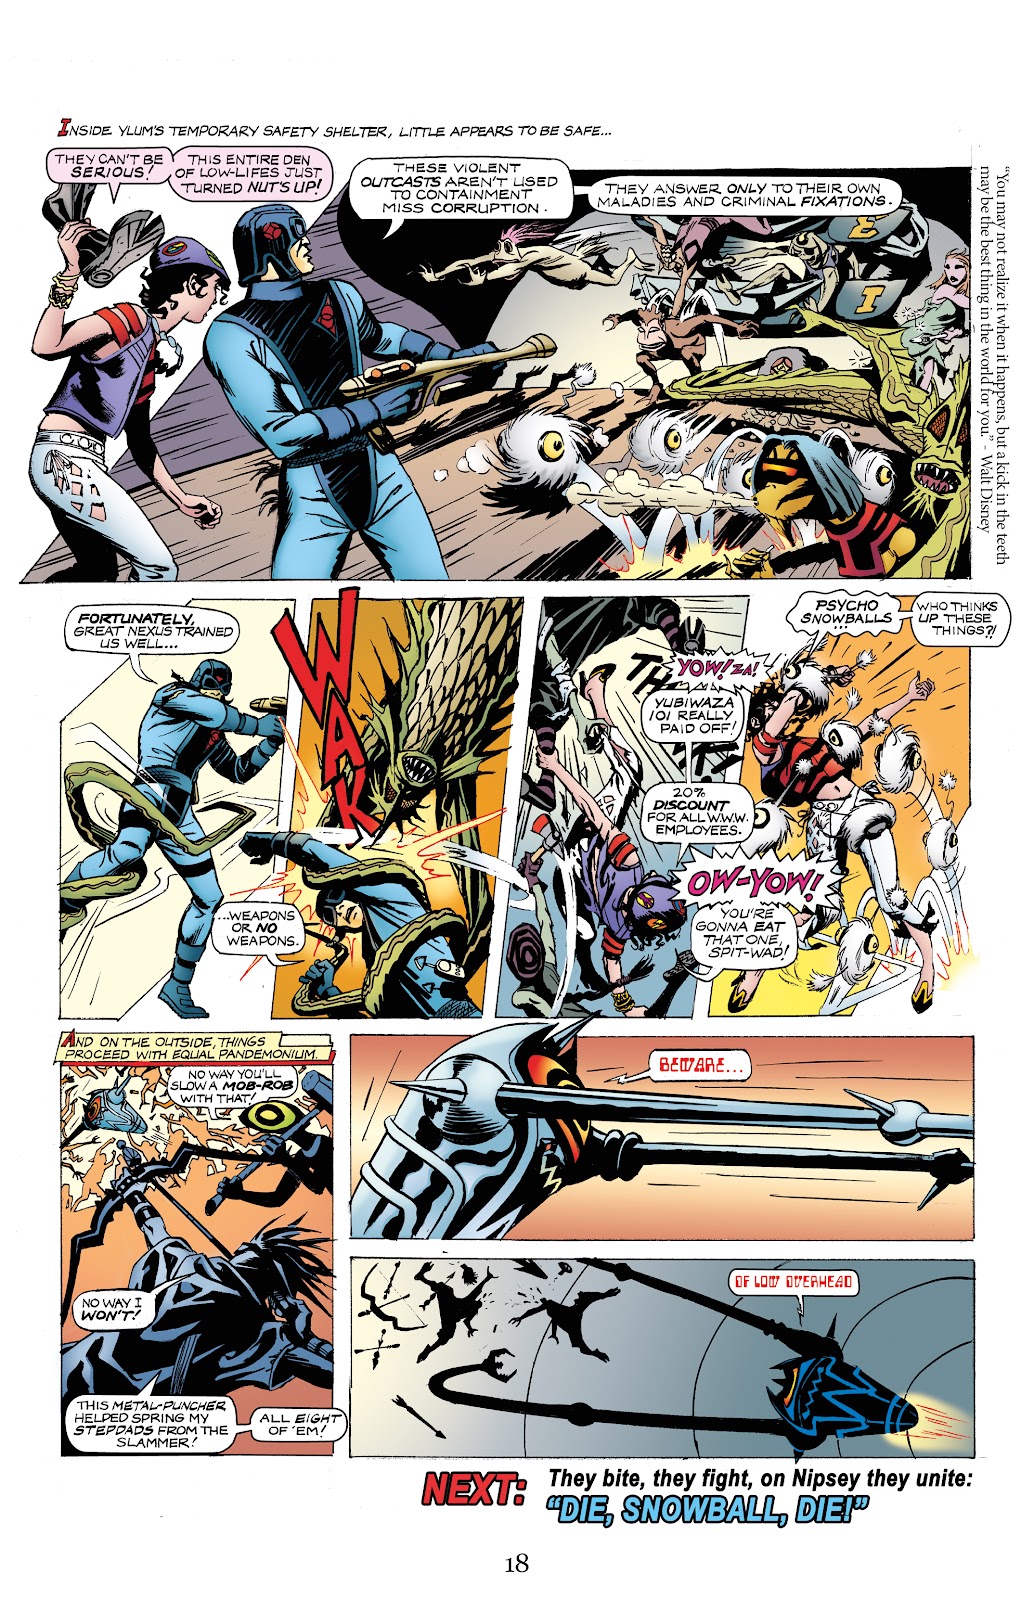 Nexus Newspaper Strips Vol 2: The Battle For Thuneworld issue 1 - Page 20